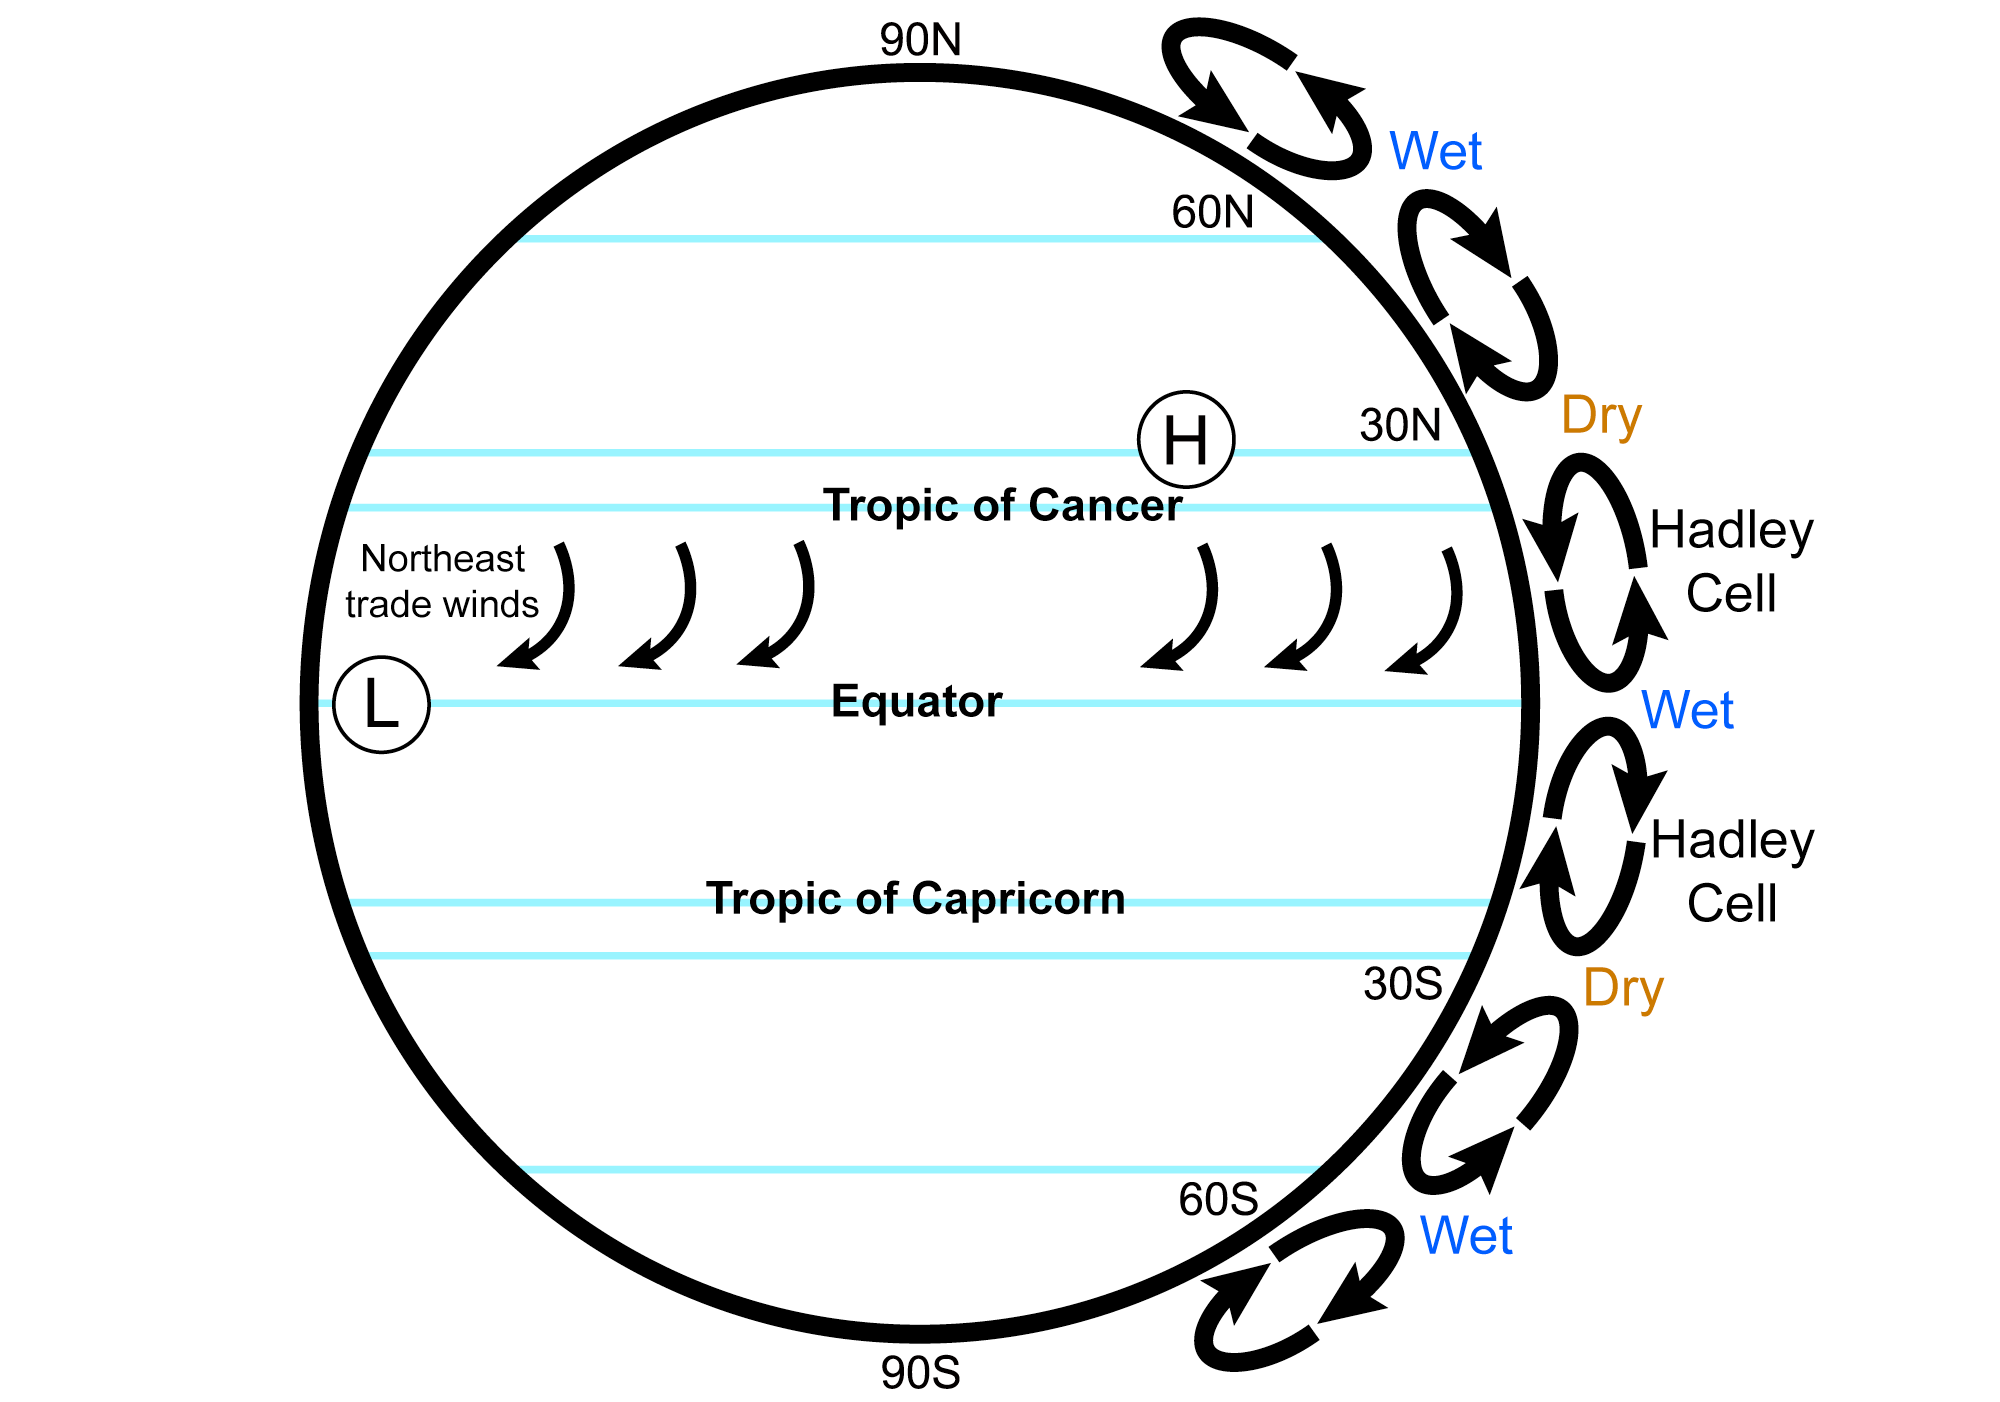 Illustration showing the effects of Hadley cells in the tropics. The Hadley cell circulates air from the equator towards the poles. As the air rises, it produces rain near the equator. As it sinks near 30 degrees latitude, it is dry, producing desert conditions. The sinking air is deflected westward to the Earth's rotation, creating trade winds. In the northern hemisphere, these winds flow from the northeast toward the southwest as they blow from higher latitudes toward the equator.